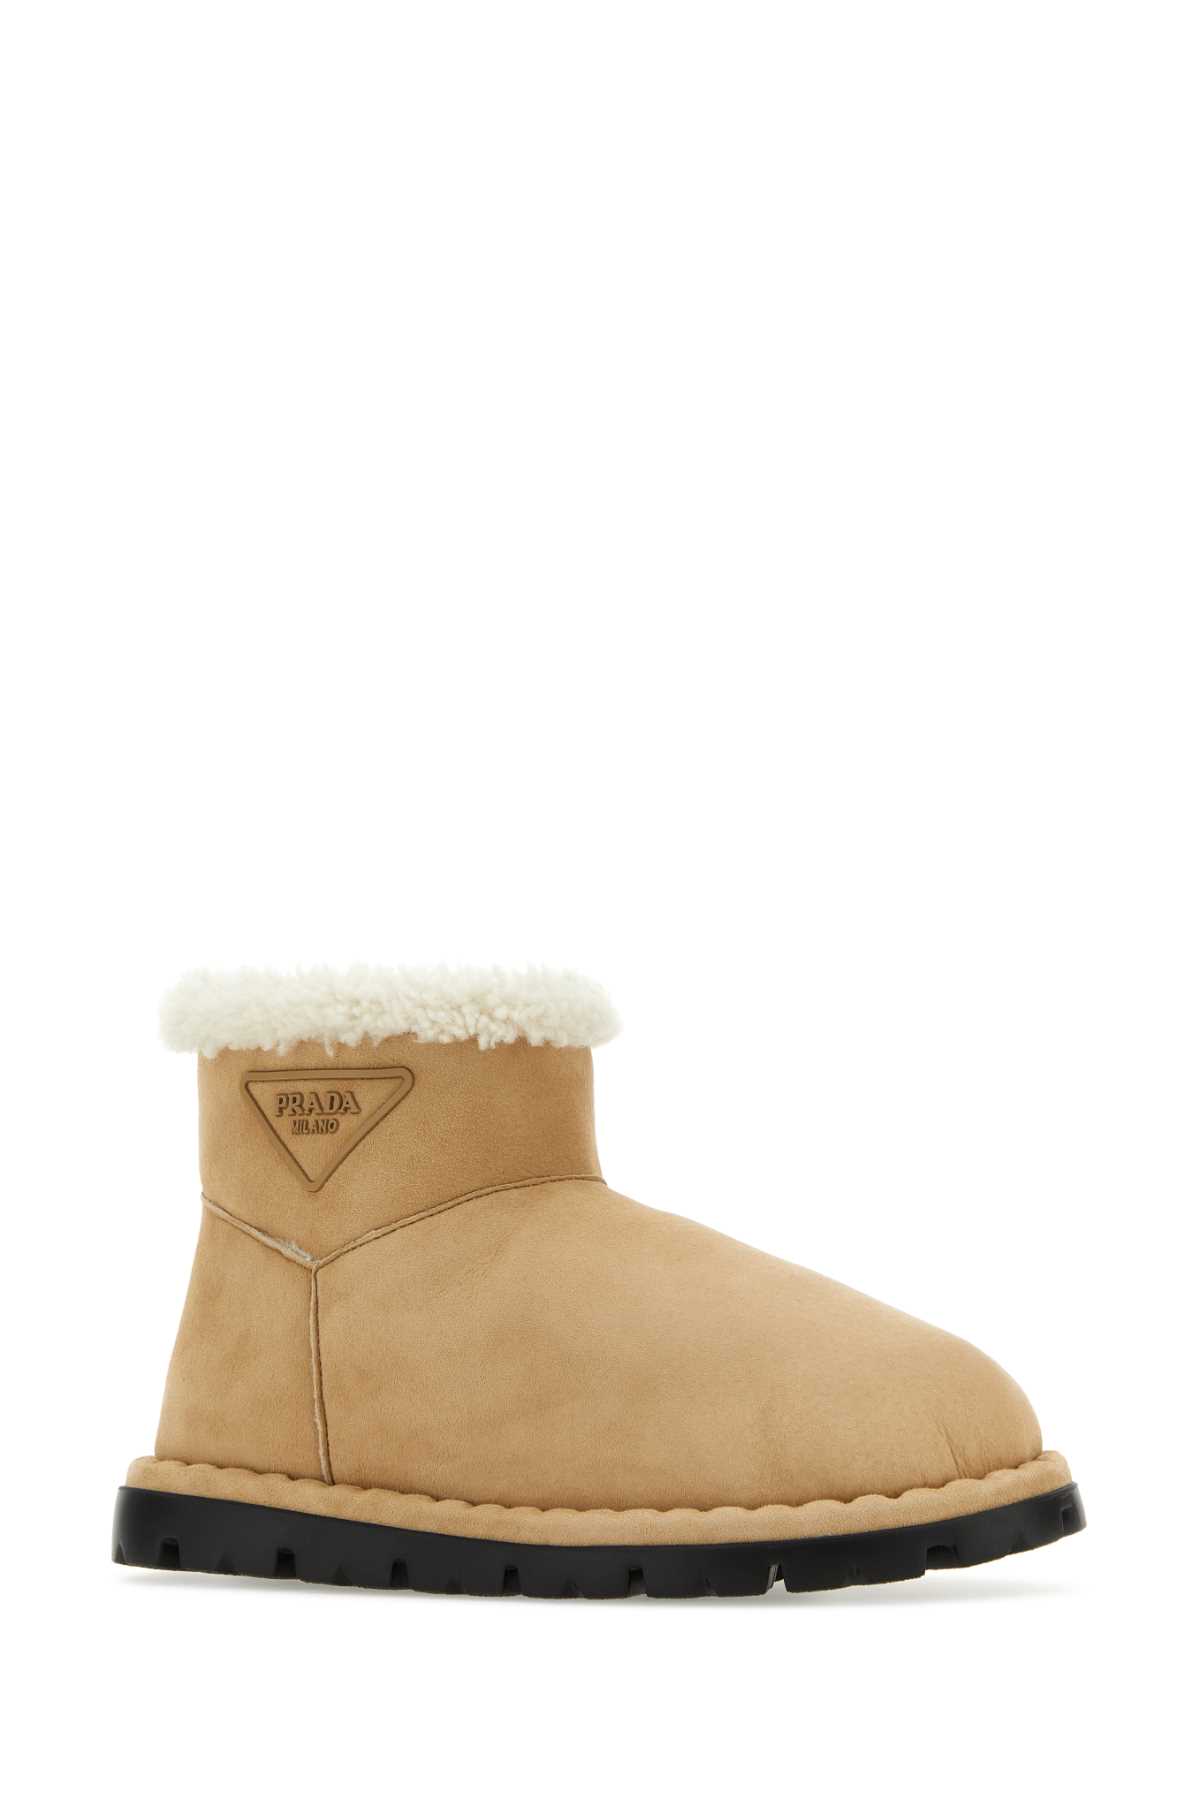 PRADA BEIGE SUEDE ANKLE BOOTS